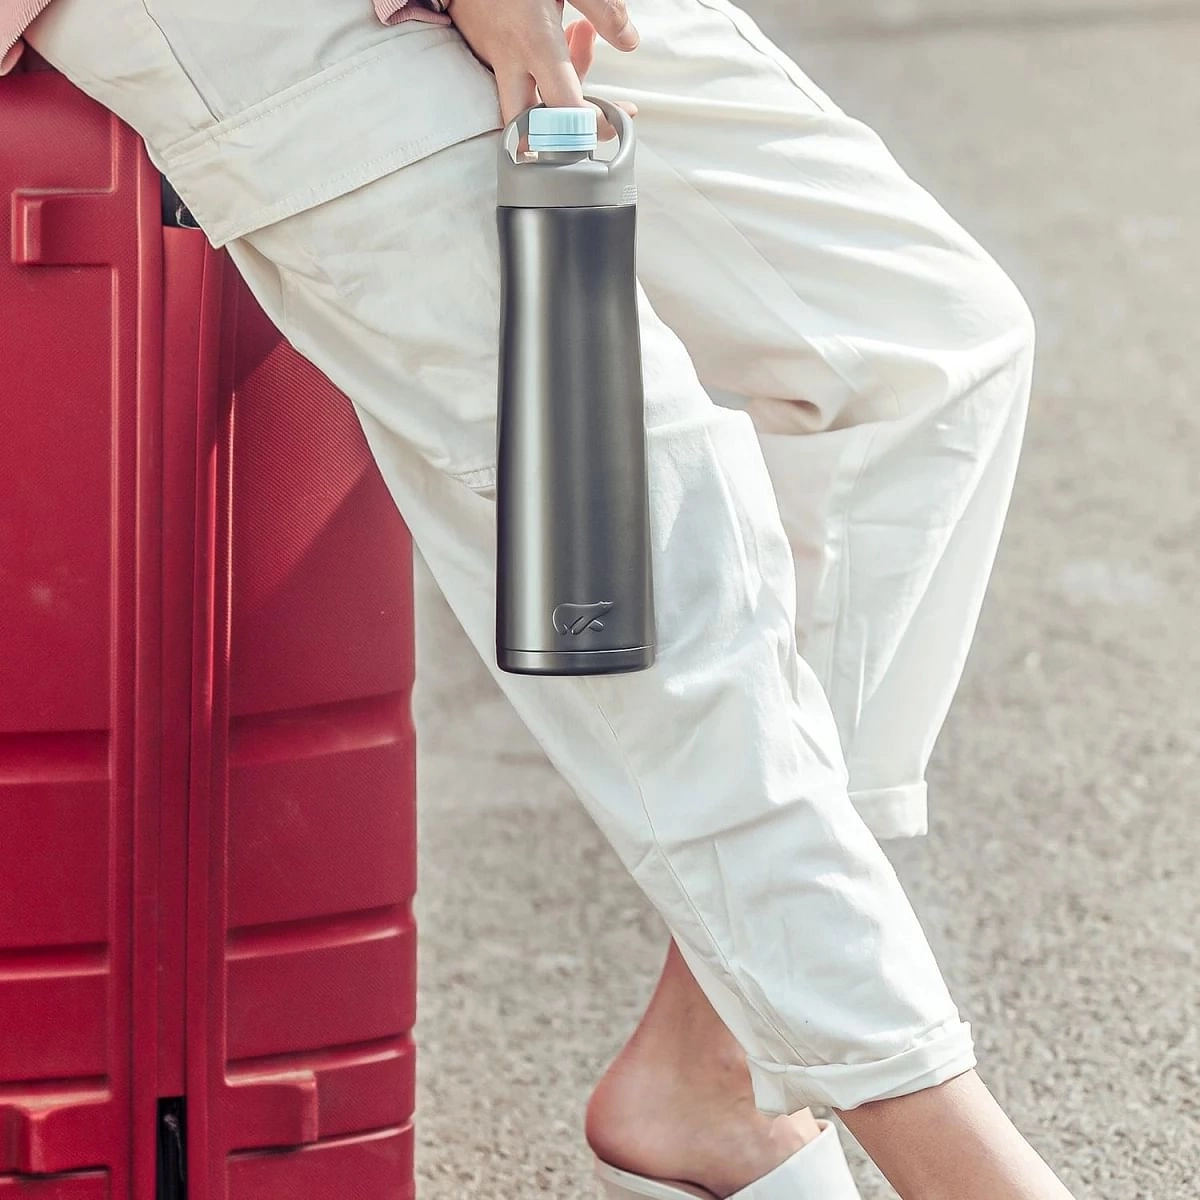 Headway Hyde Vacuum Insulated Stainless Steel Bottle Space Grey 550 ML Grey 10Y+